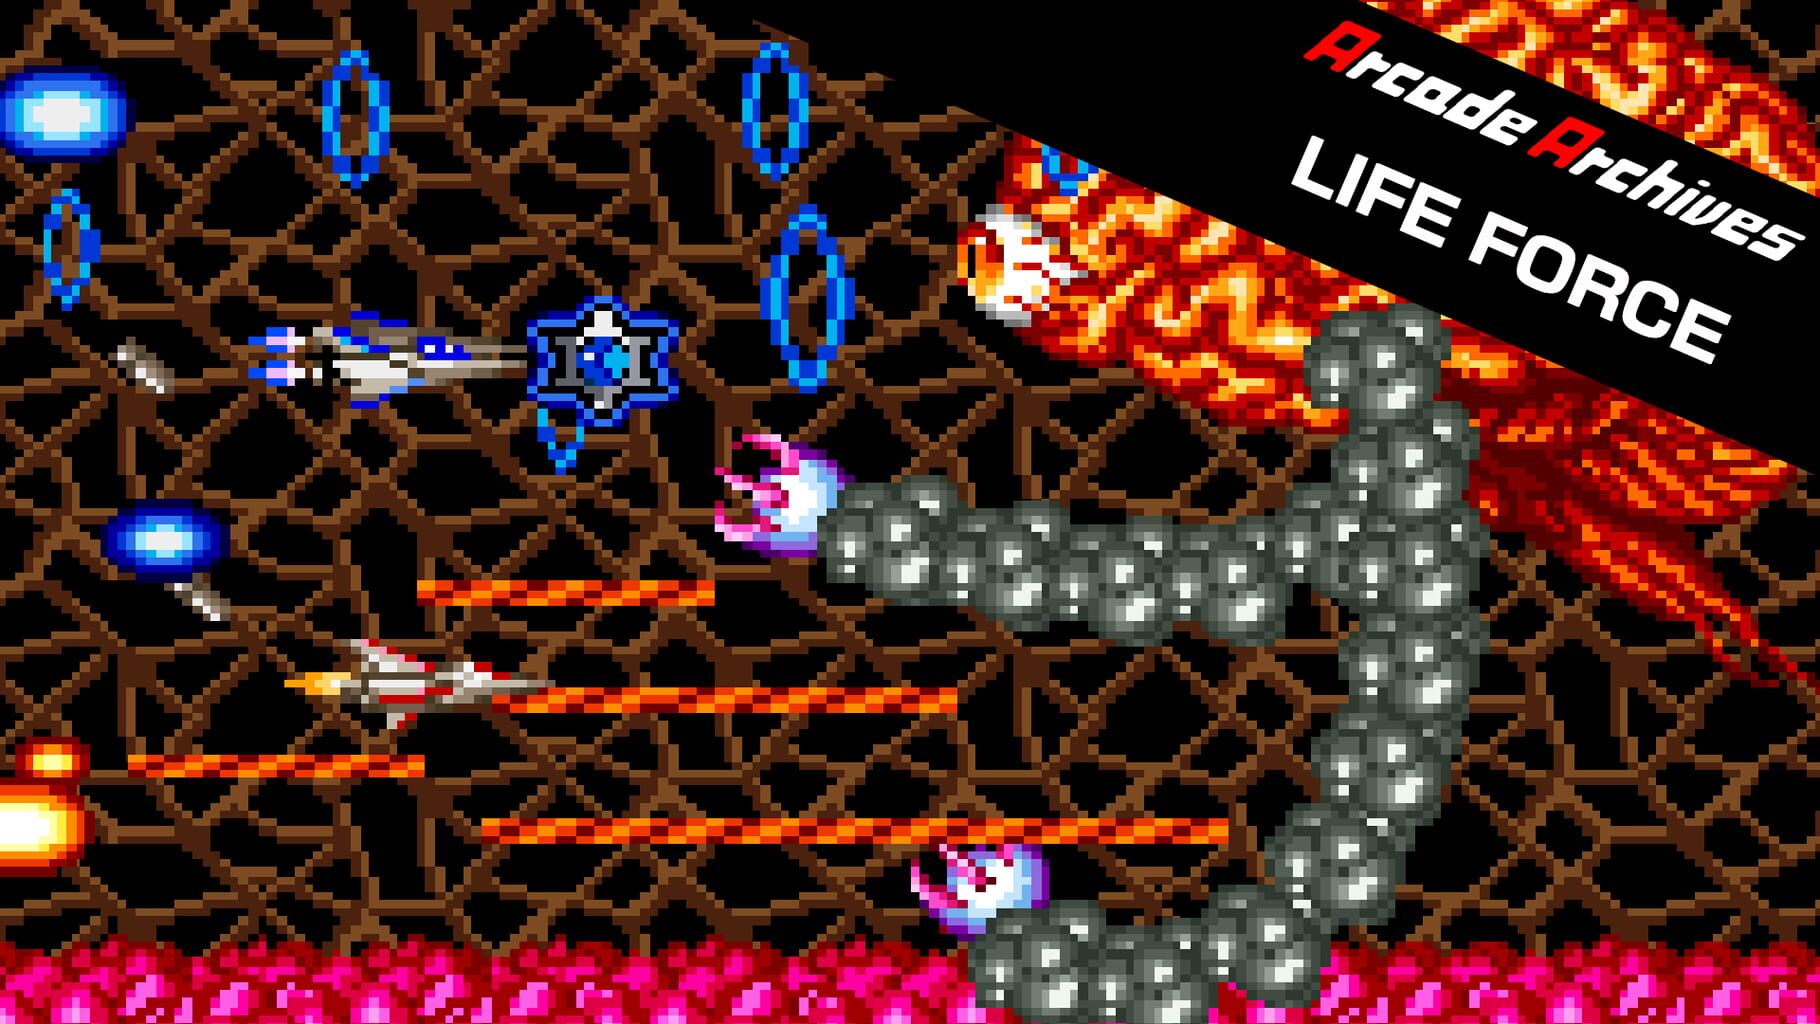 Arcade Archives: Life Force artwork